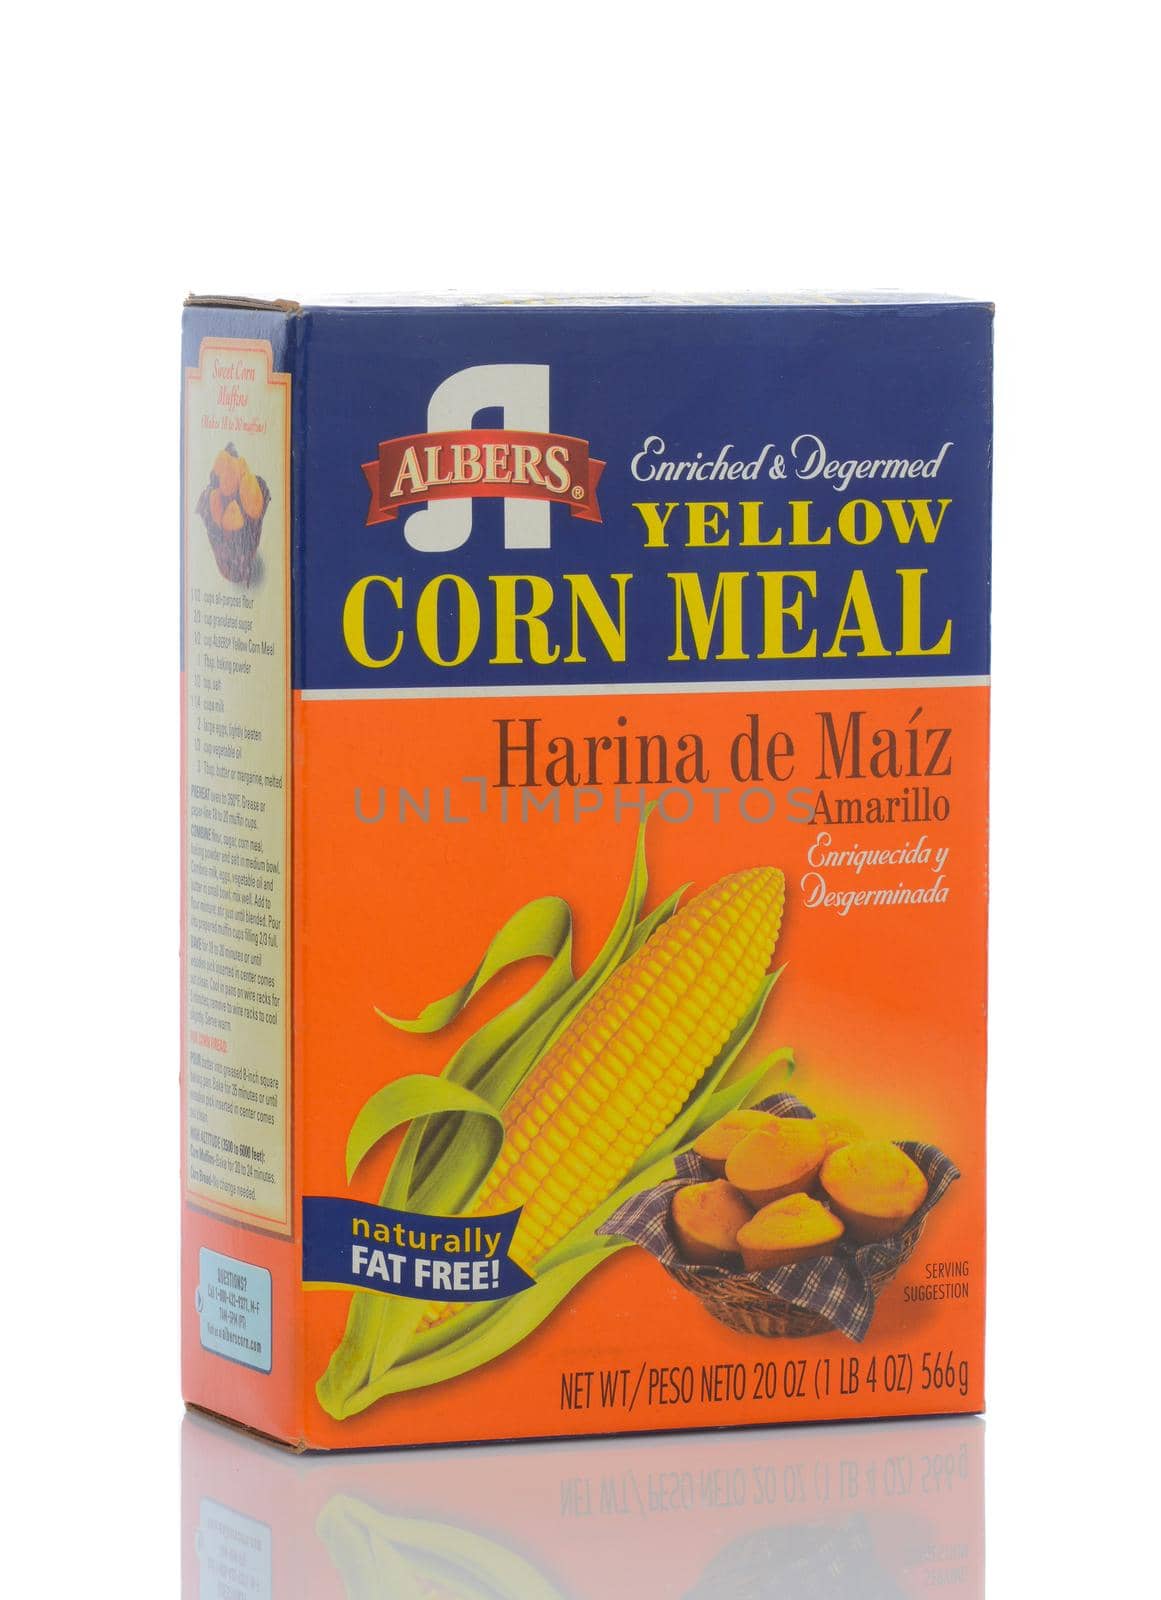 A 20 oz box of Albers Yellow Corn Meal by sCukrov